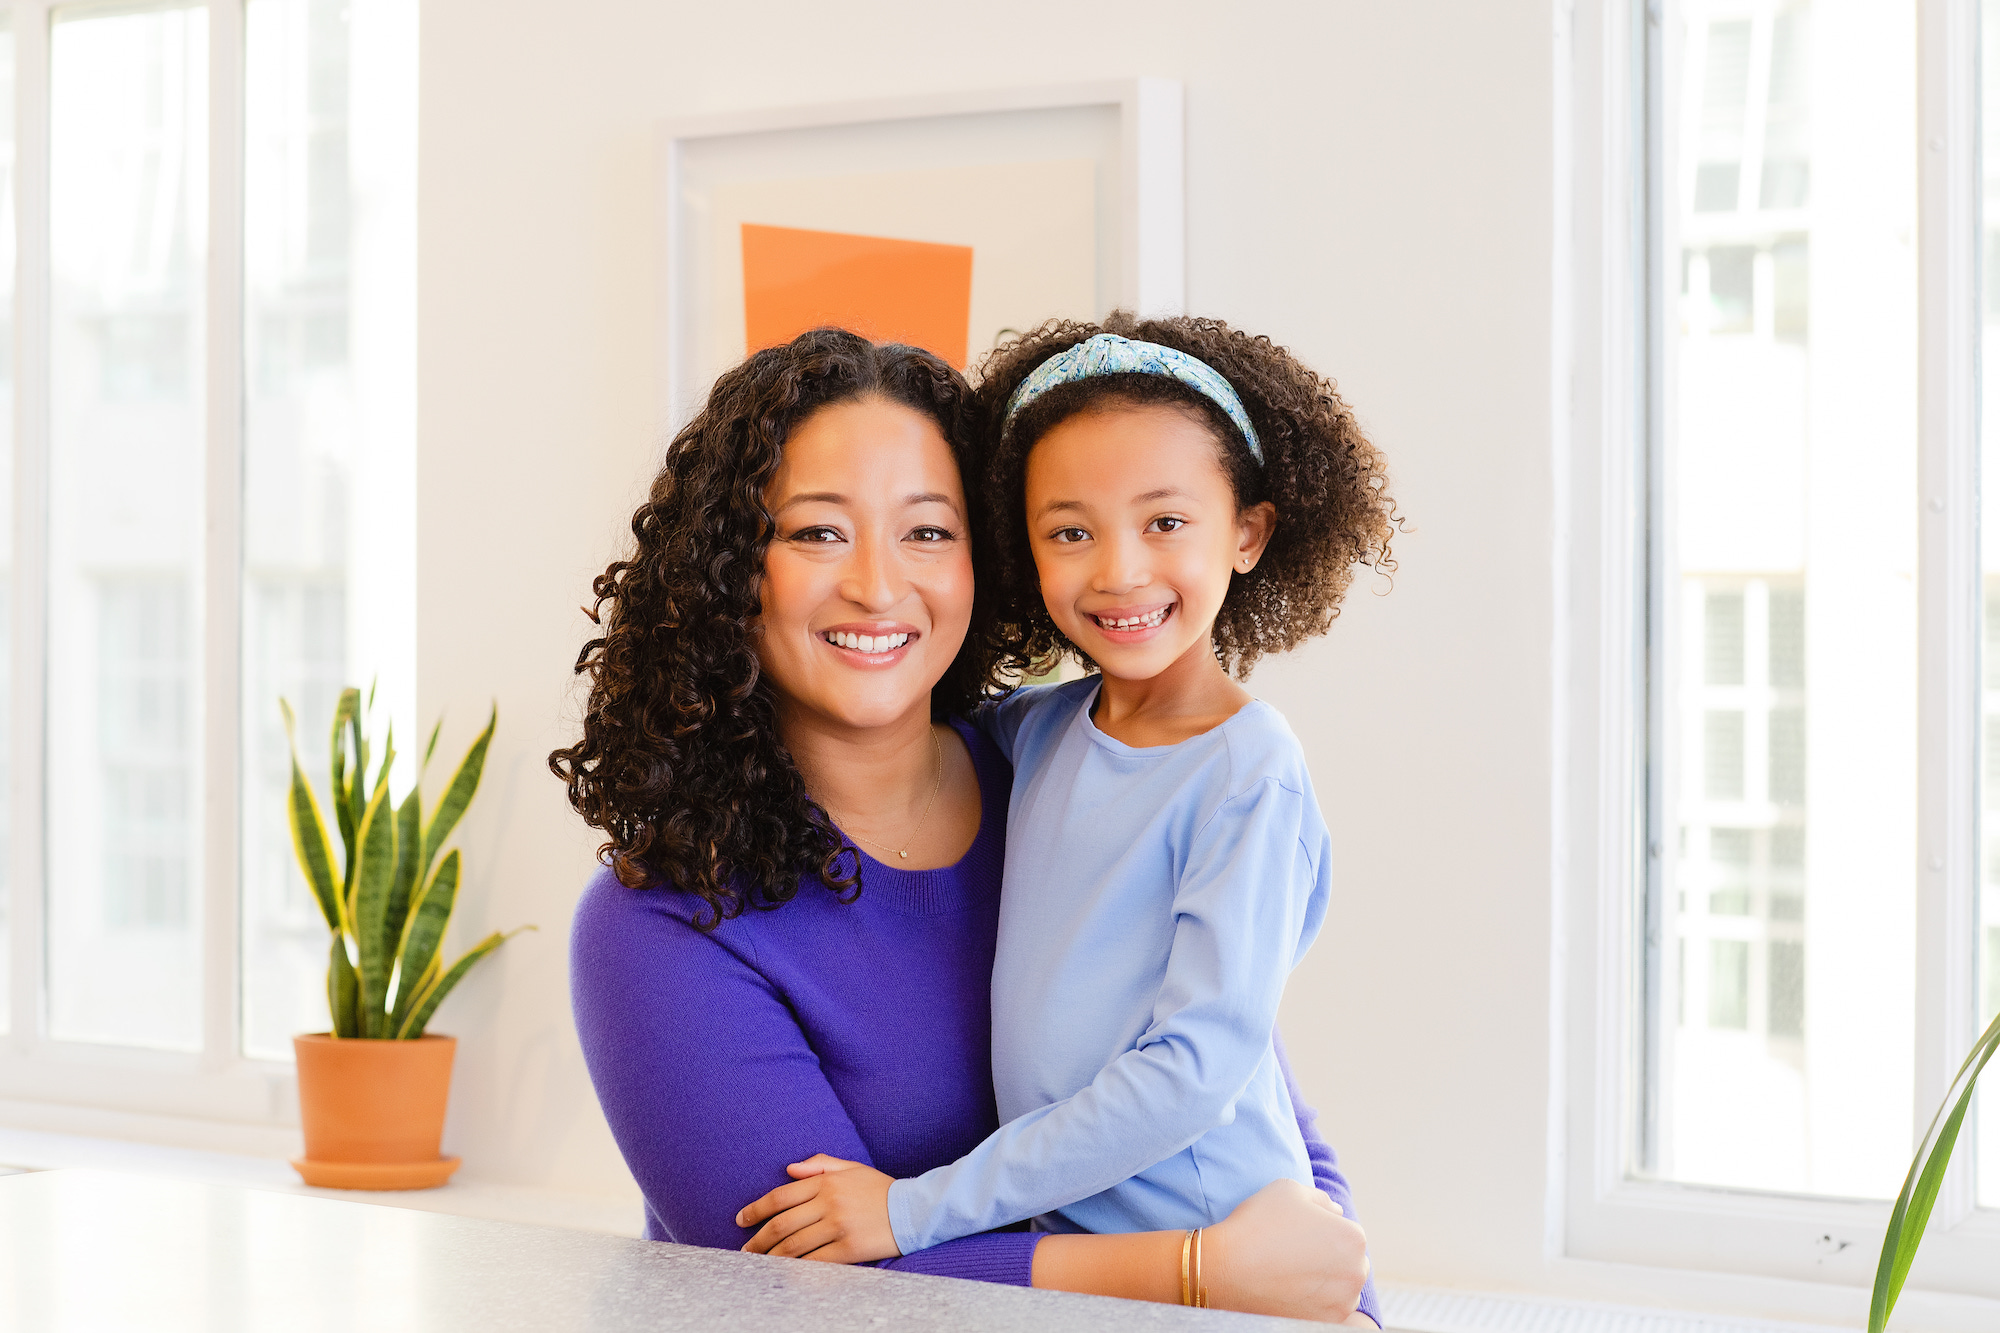 Partake Founder and CEO Denise Woodard and her daughter Vivienne